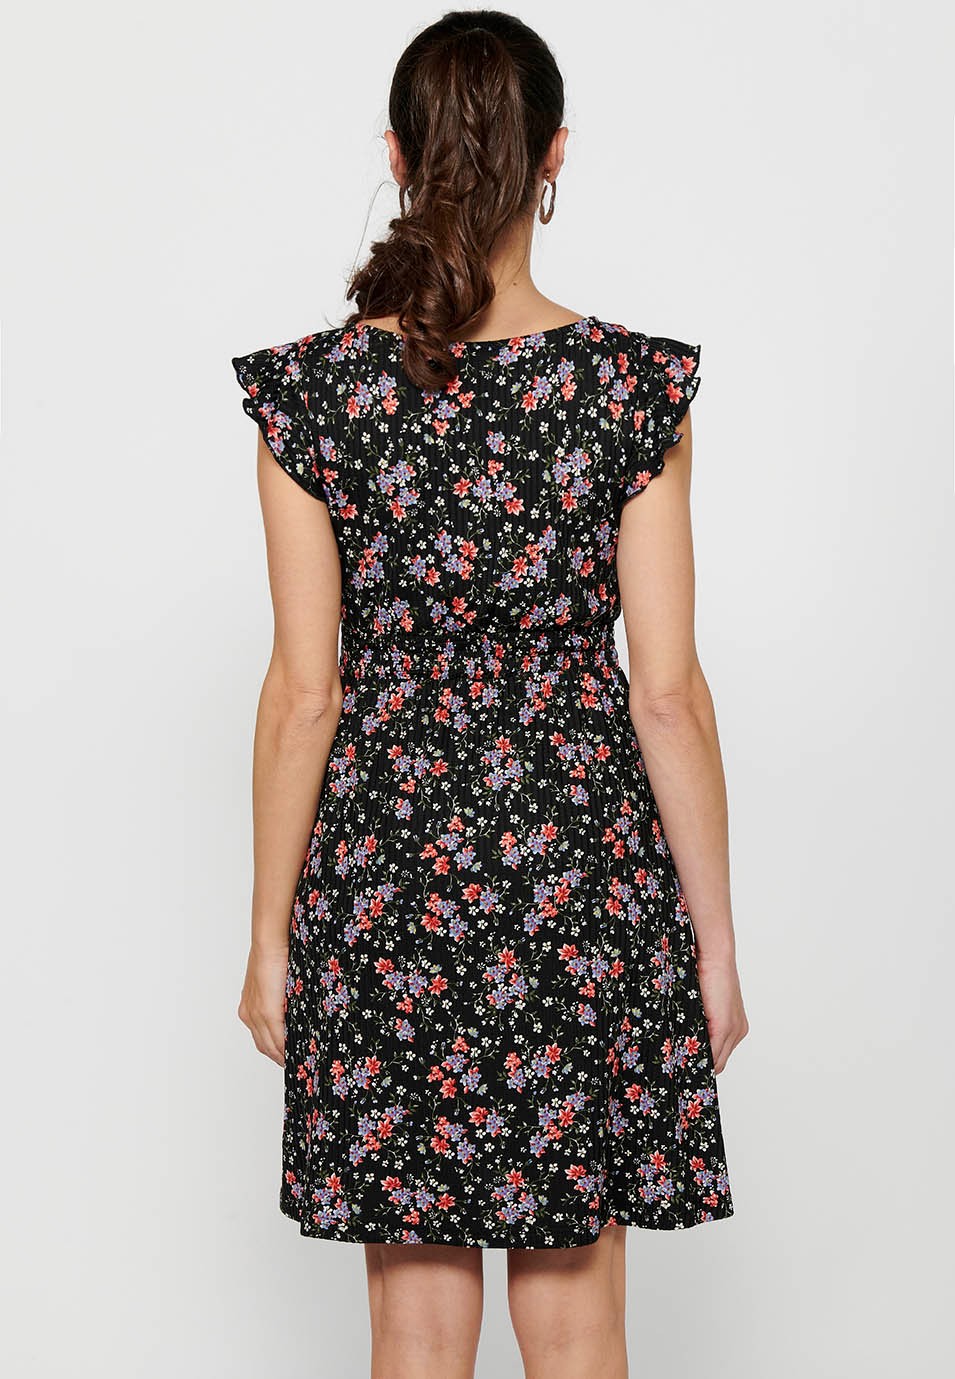 Short-sleeved dress with crossed V-neckline and floral print with fitted rubberized waist in Multicolor for Women 8